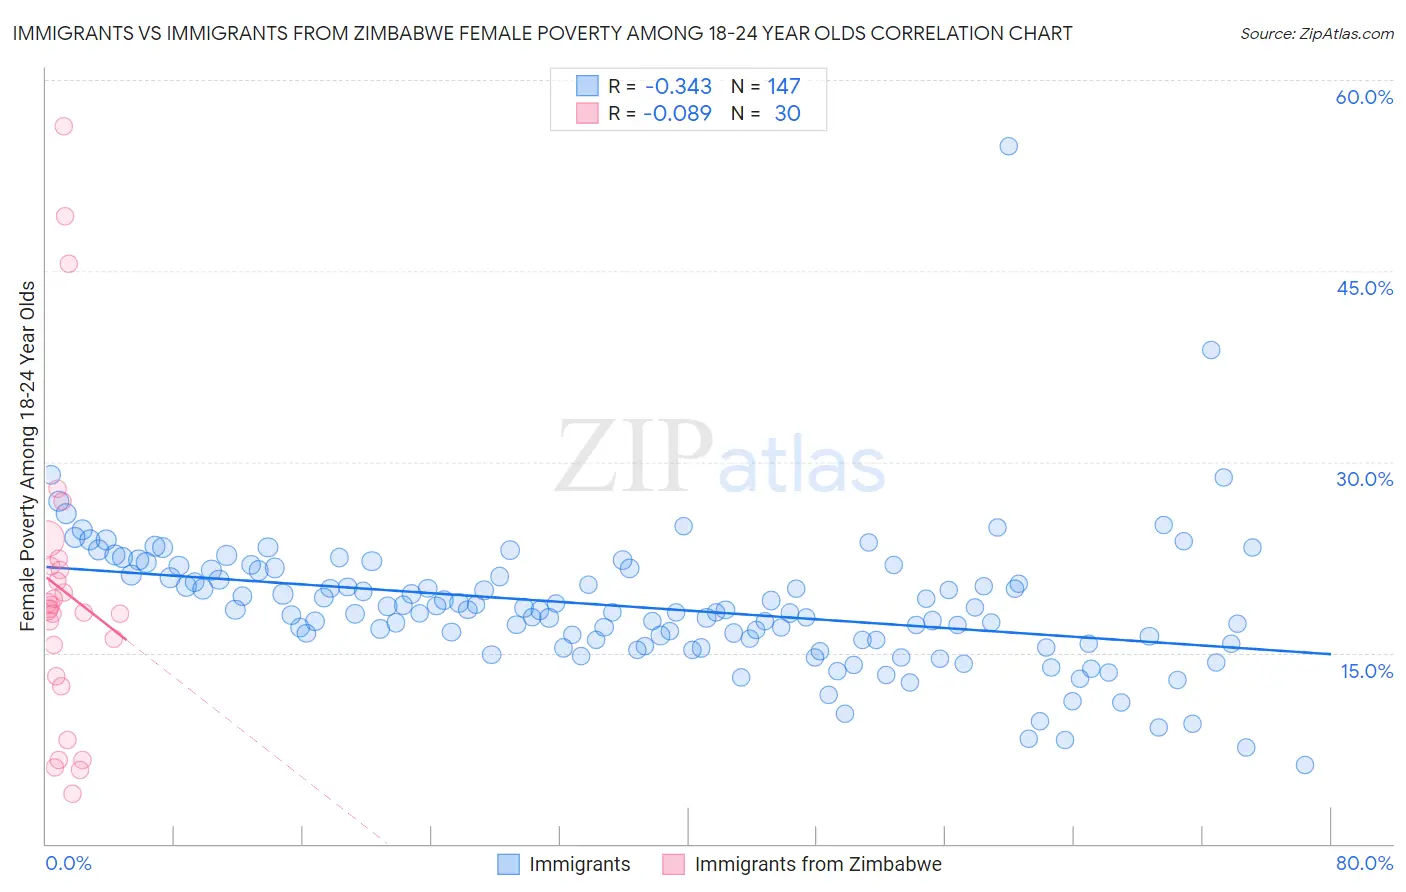 Immigrants vs Immigrants from Zimbabwe Female Poverty Among 18-24 Year Olds